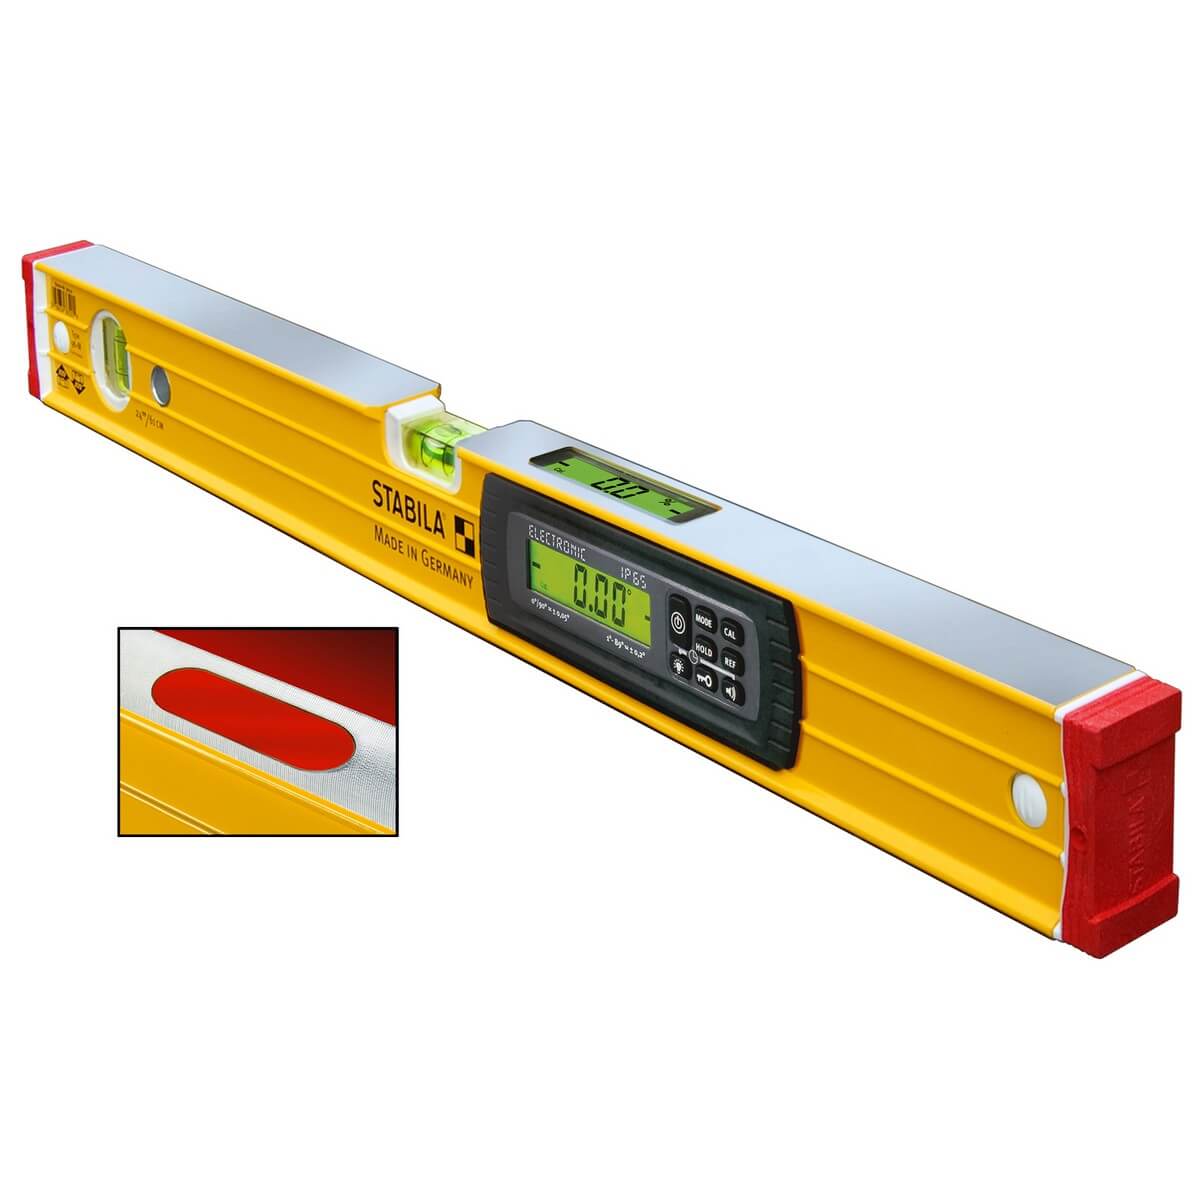 Stabila 36520 -  24" Magnetic TECH Level W/Case - wise-line-tools